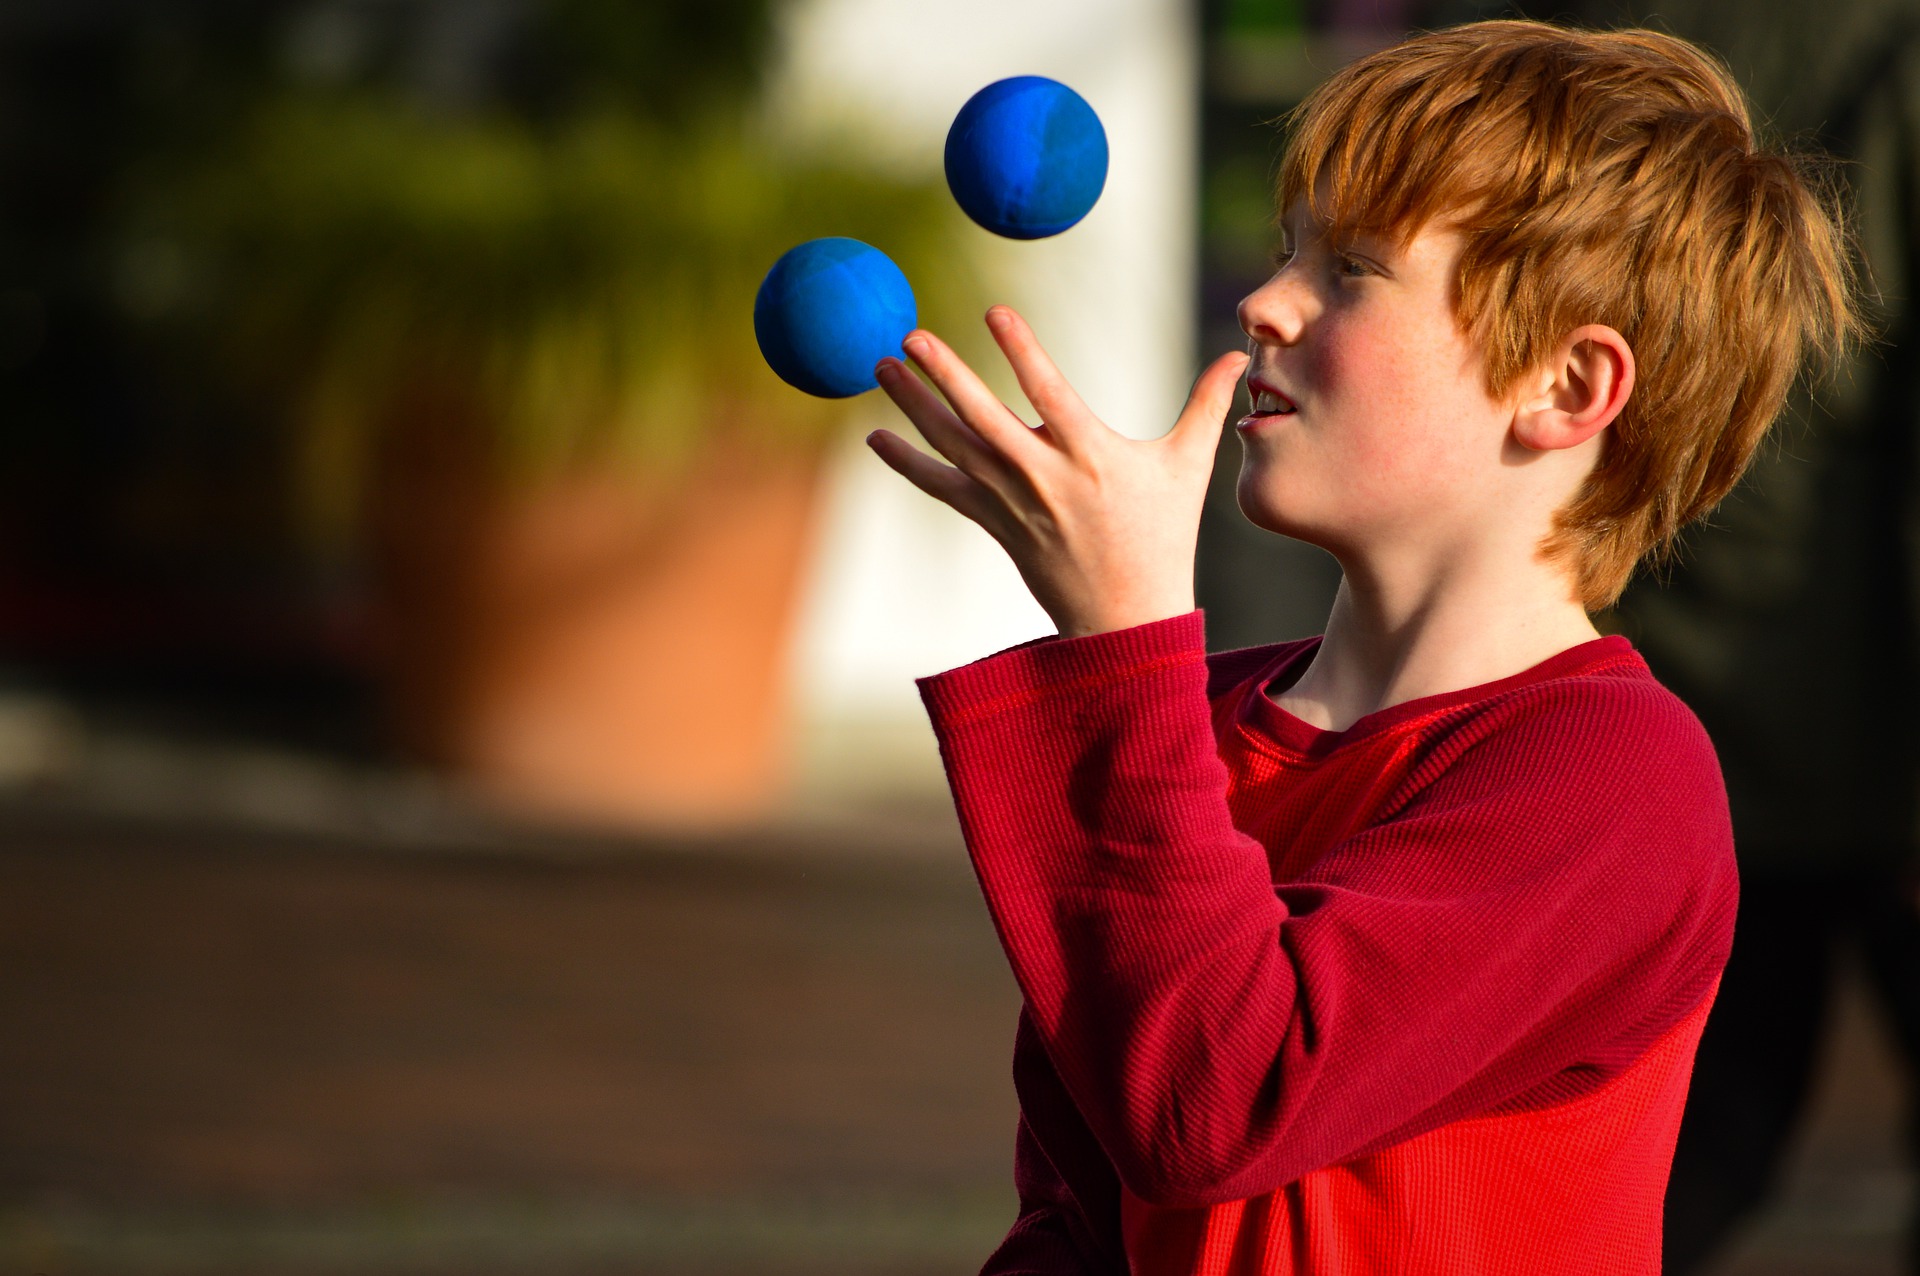 ginger-haired boy wearing a red shirt juggling two blue balls